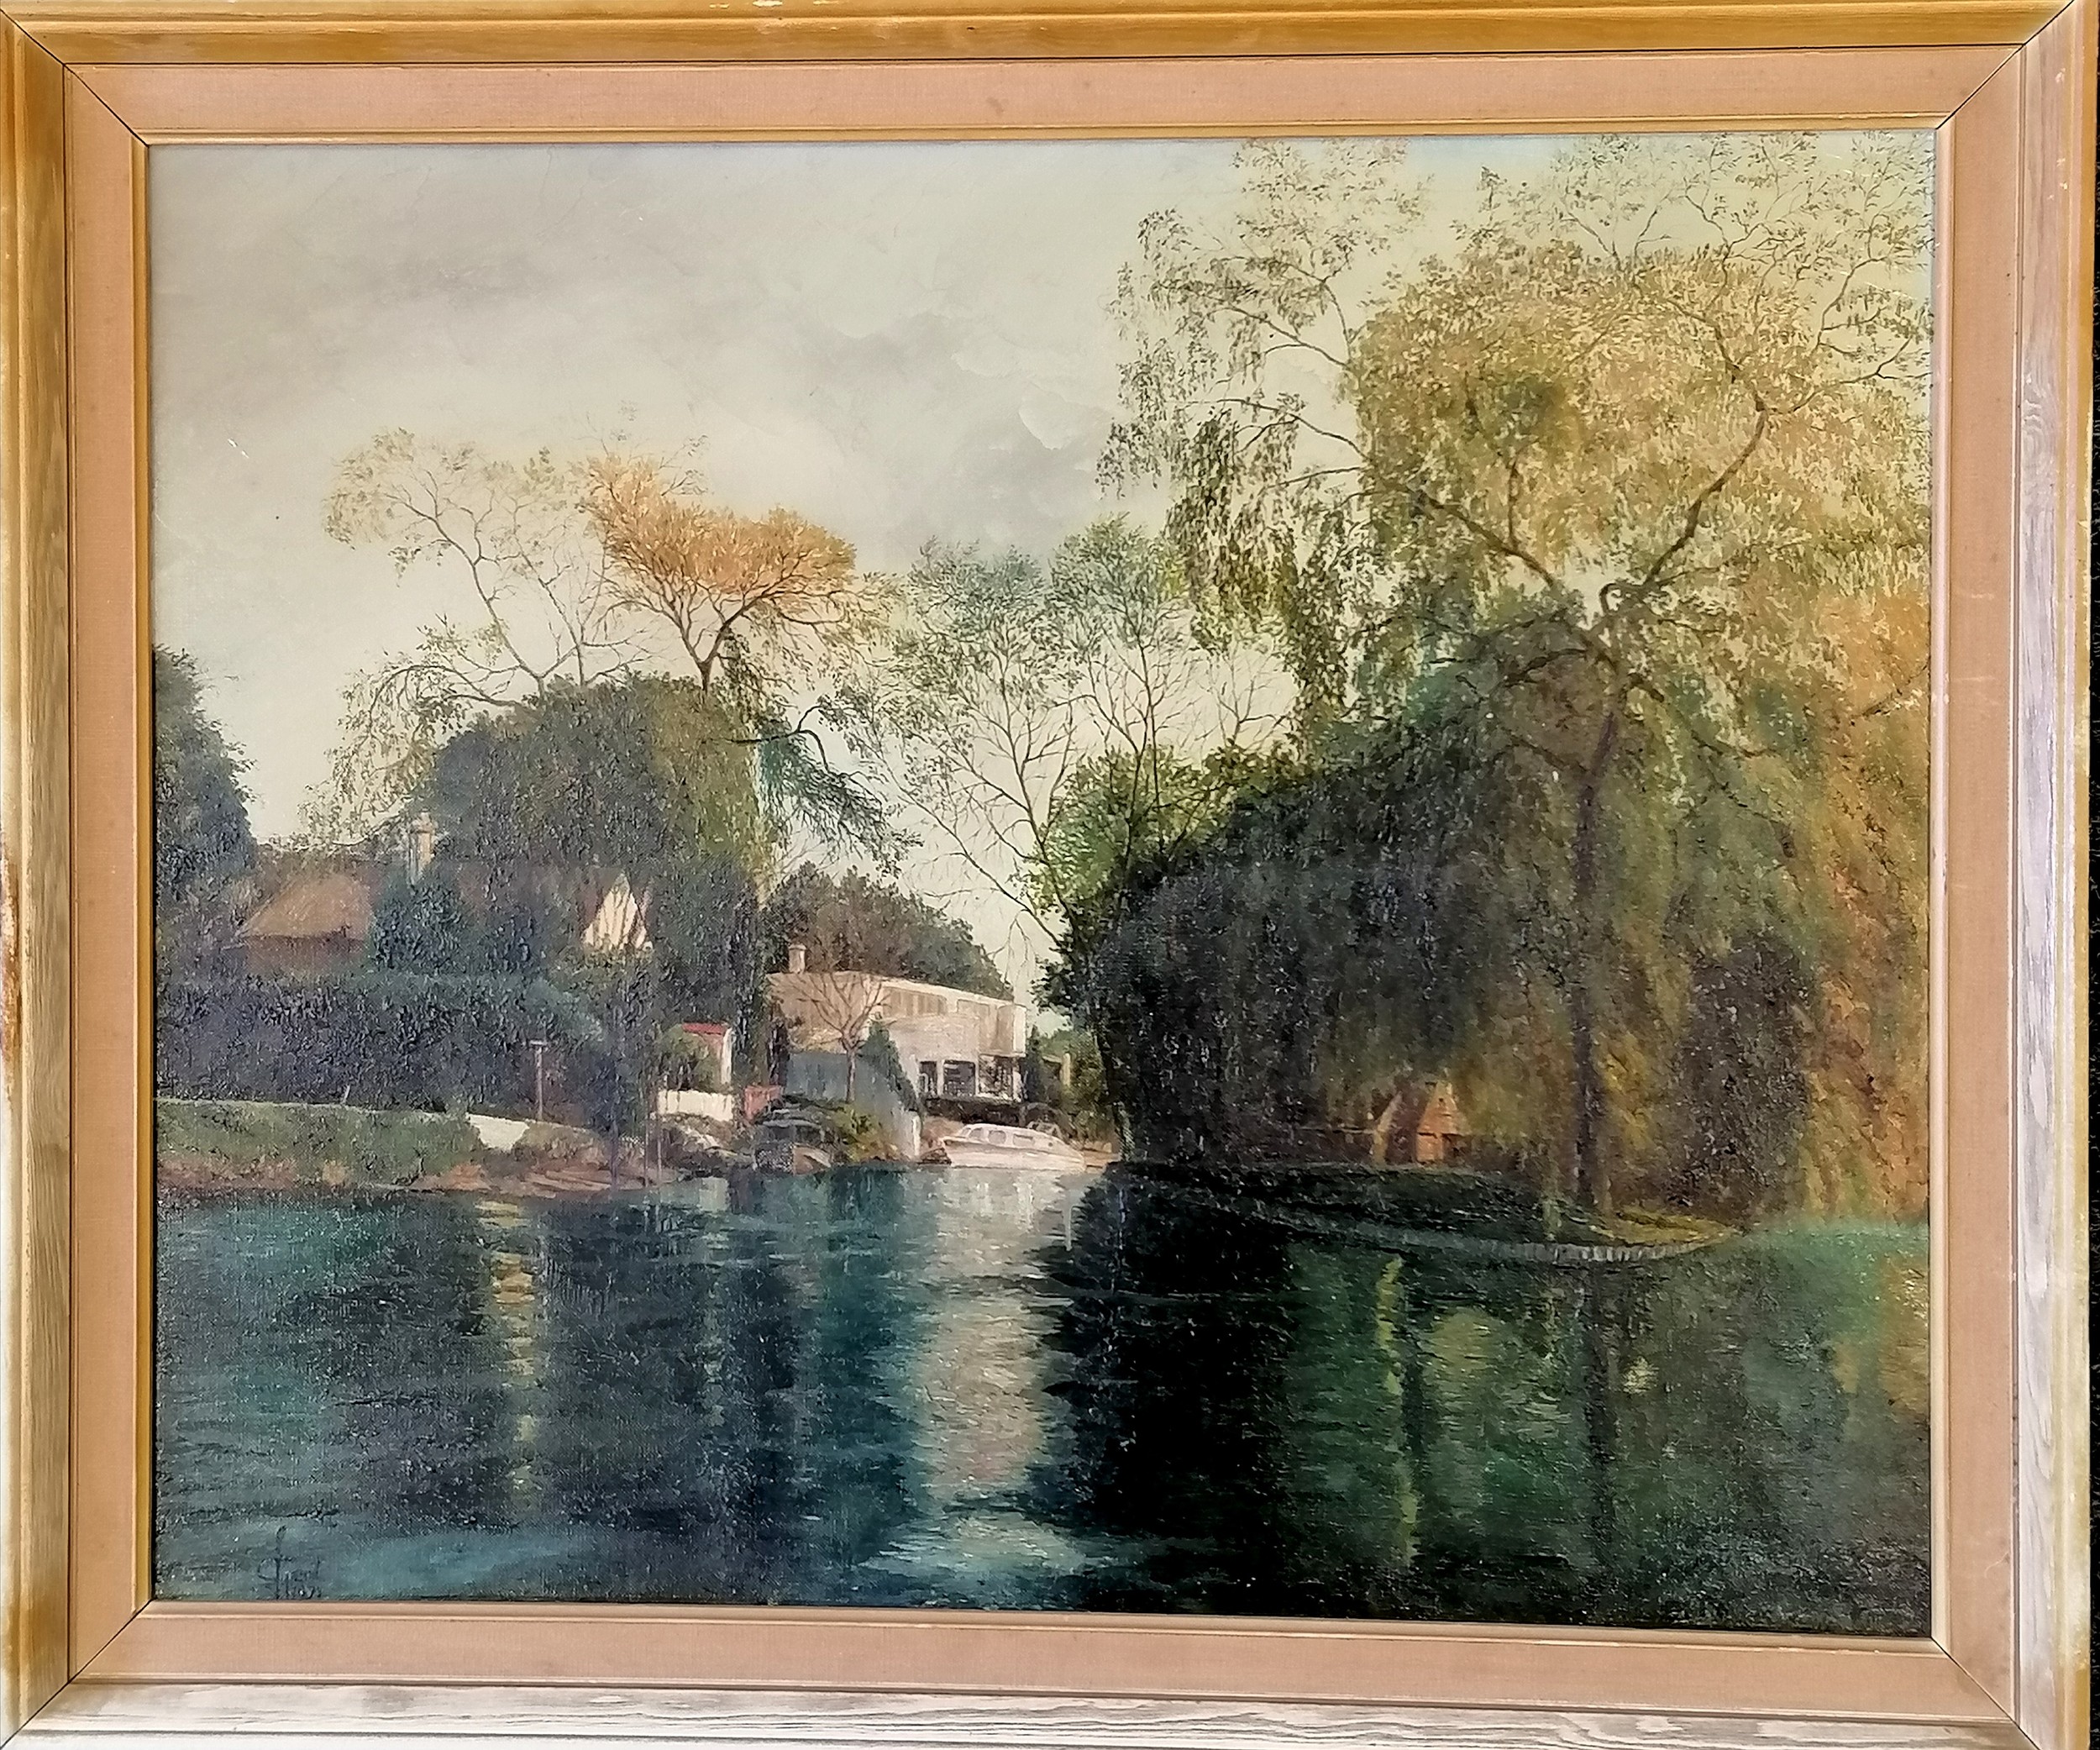 1971 original signed oil painting on canvas of a river with riverside house- Runnymede? - 58.5cm x